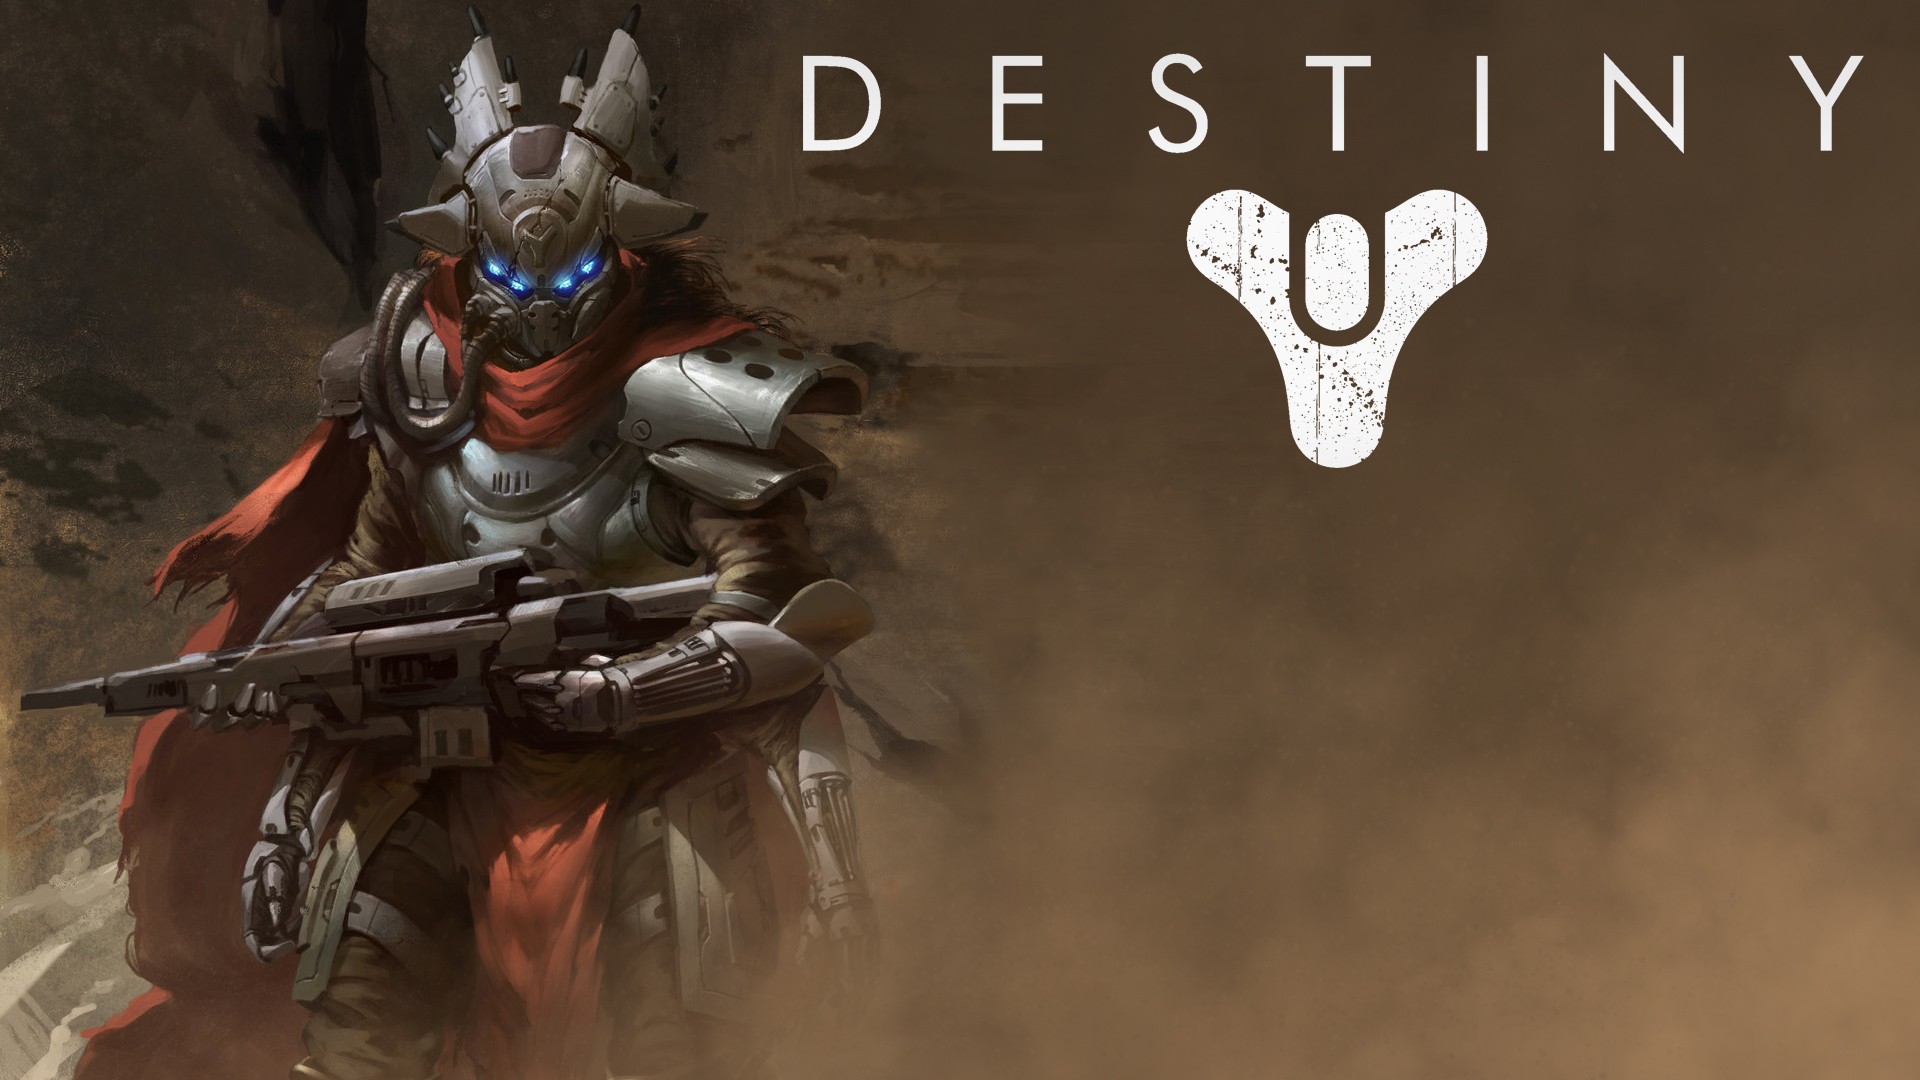 70 Awesome Destiny Wallpapers for your Computer Tablet or Phone